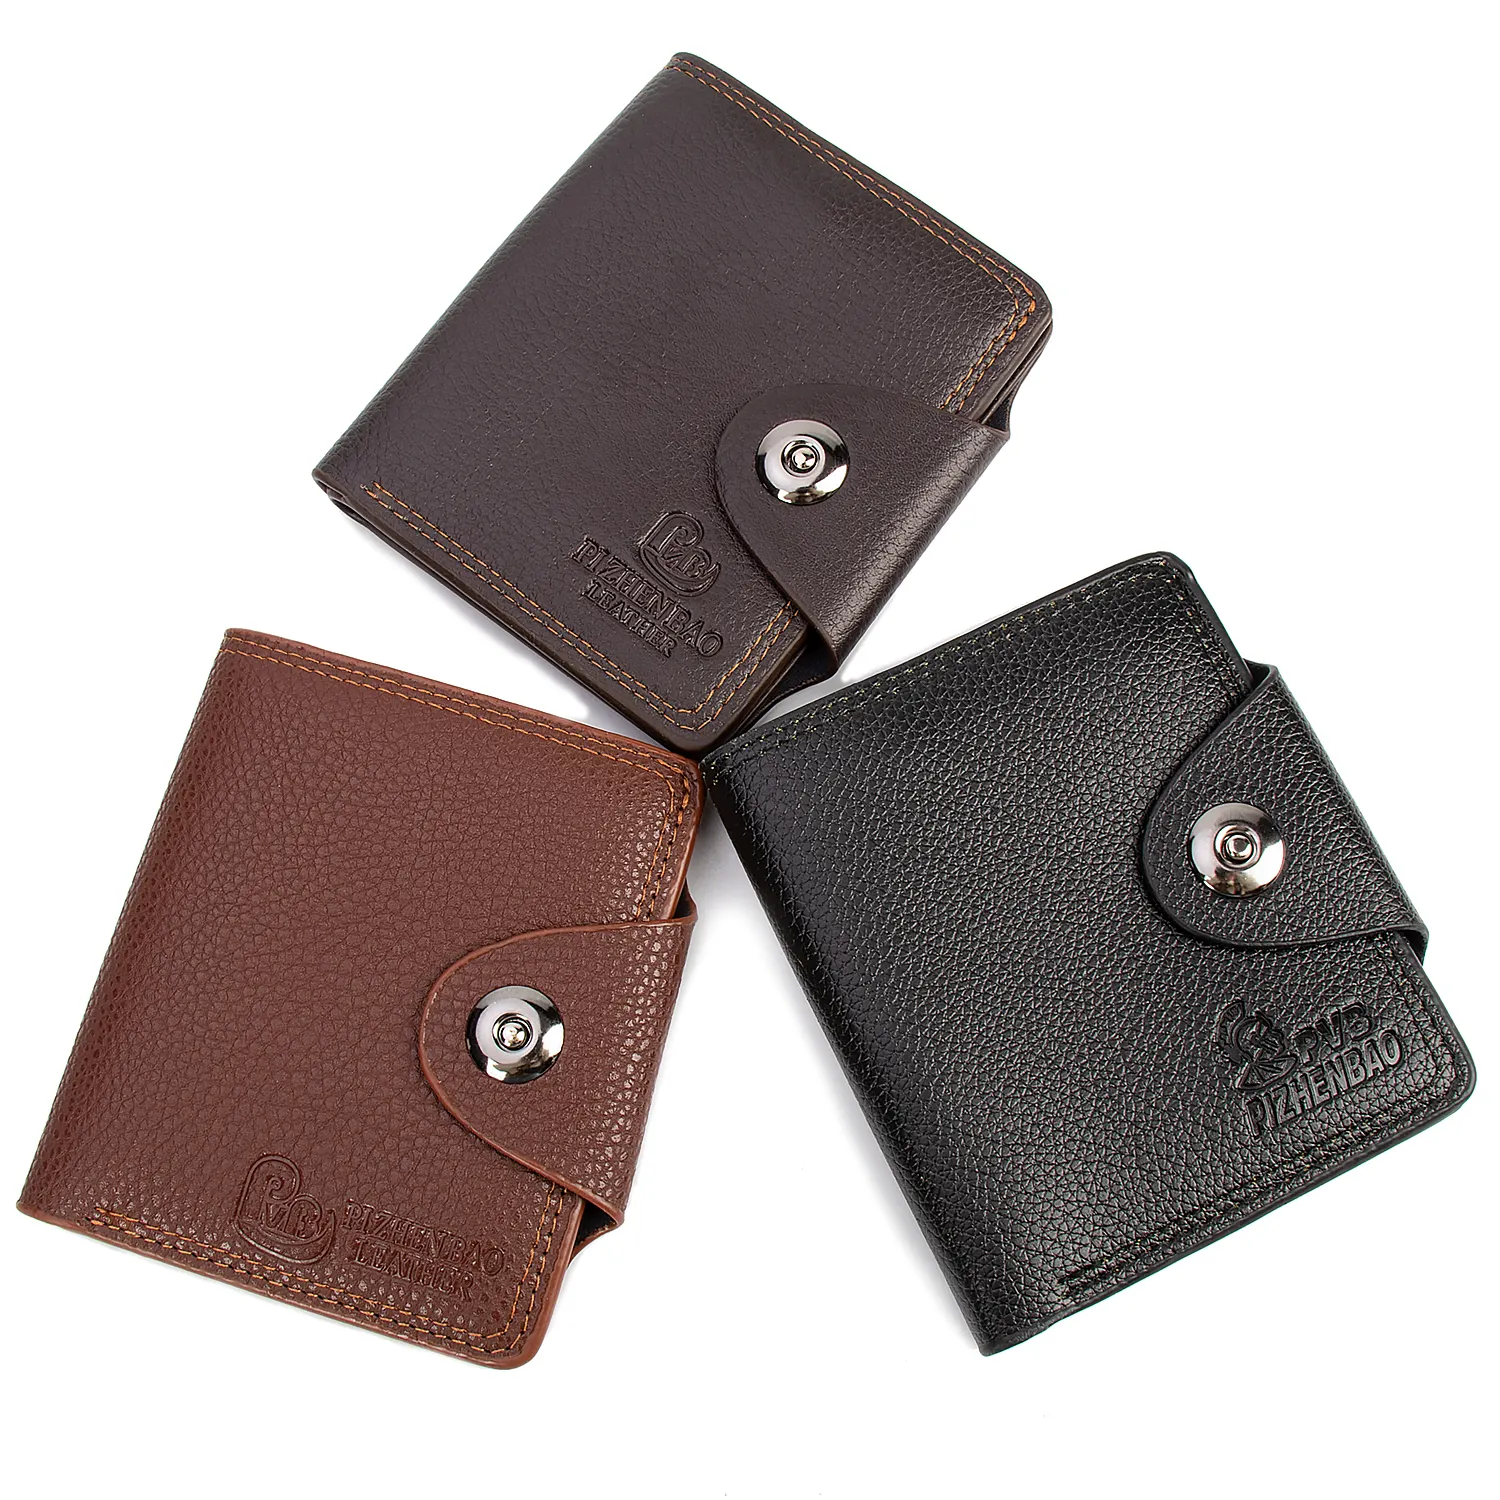 Litchi Patterned Leather Wallet Large Capacity Multi Card Slot Short Wallet PU Leather Wallet